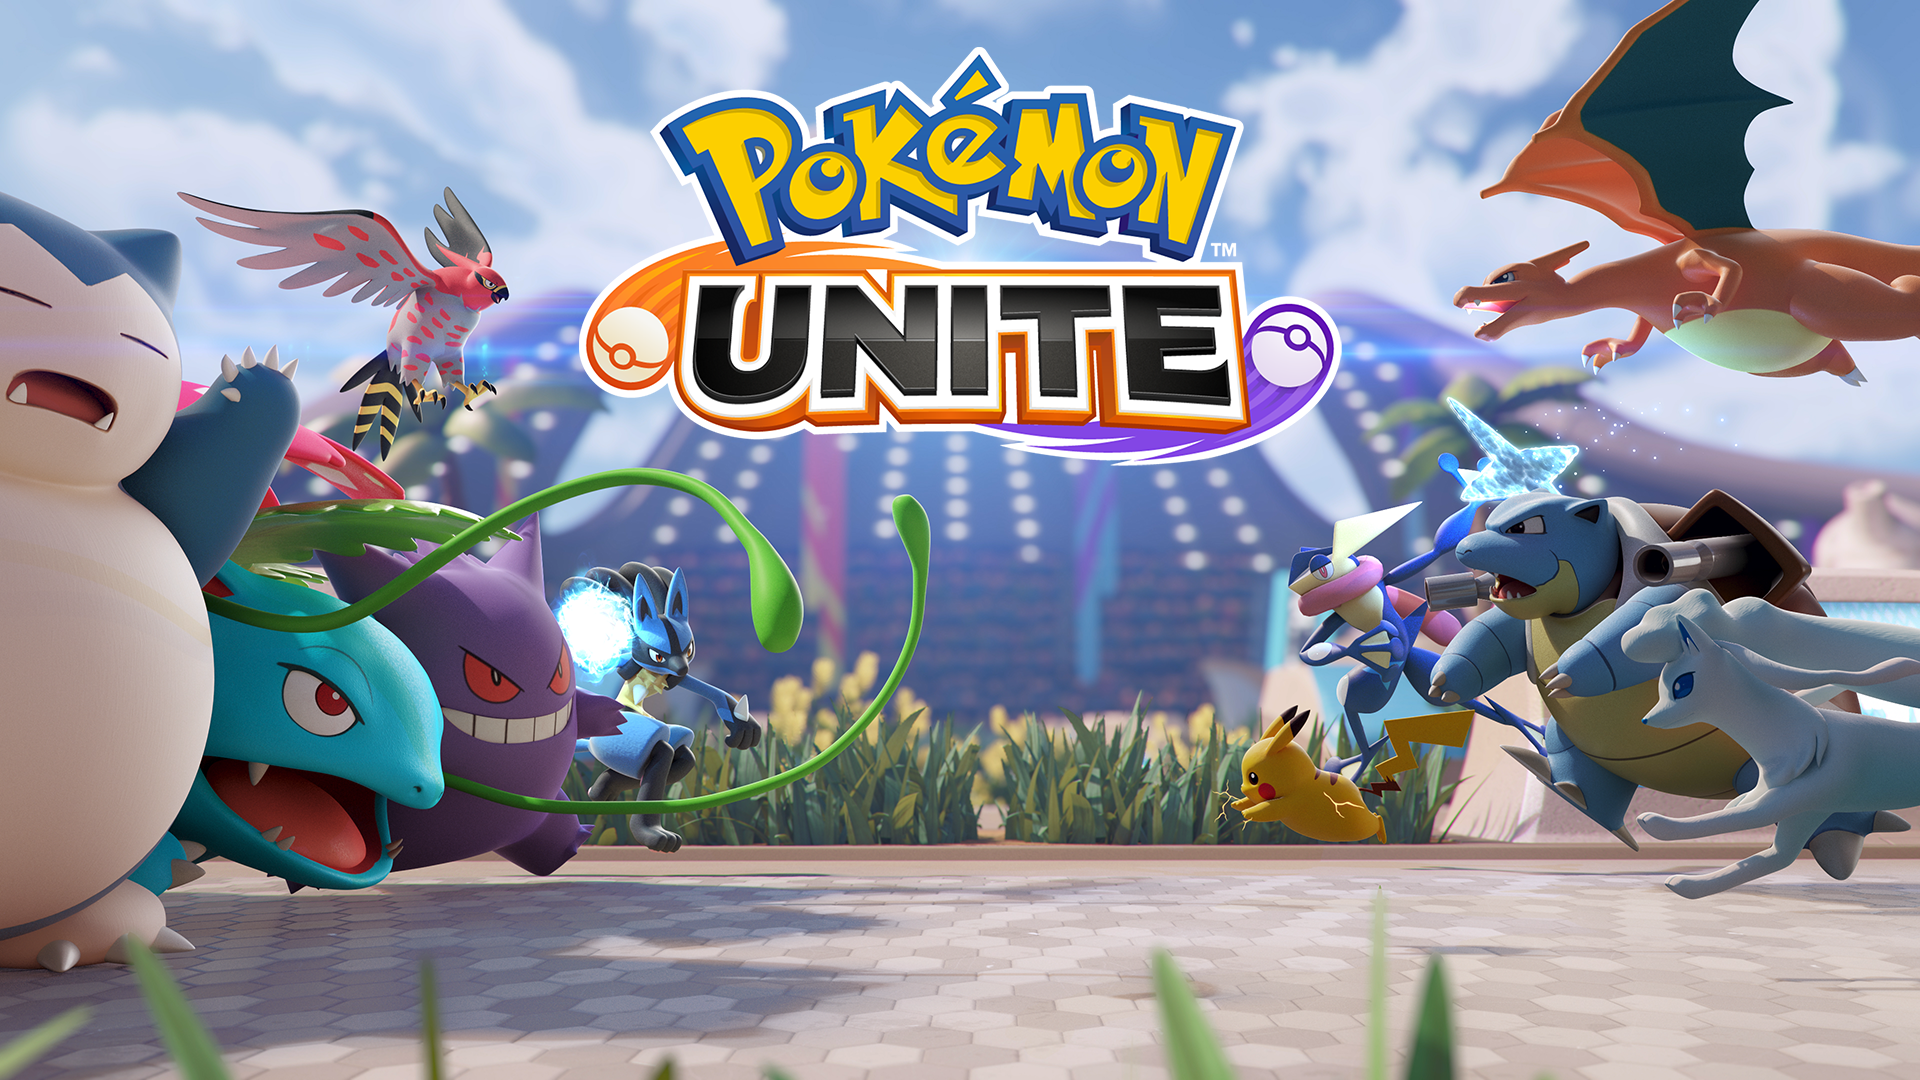 First Pokémon Unit Championship Tournament includes over $1m in prizes